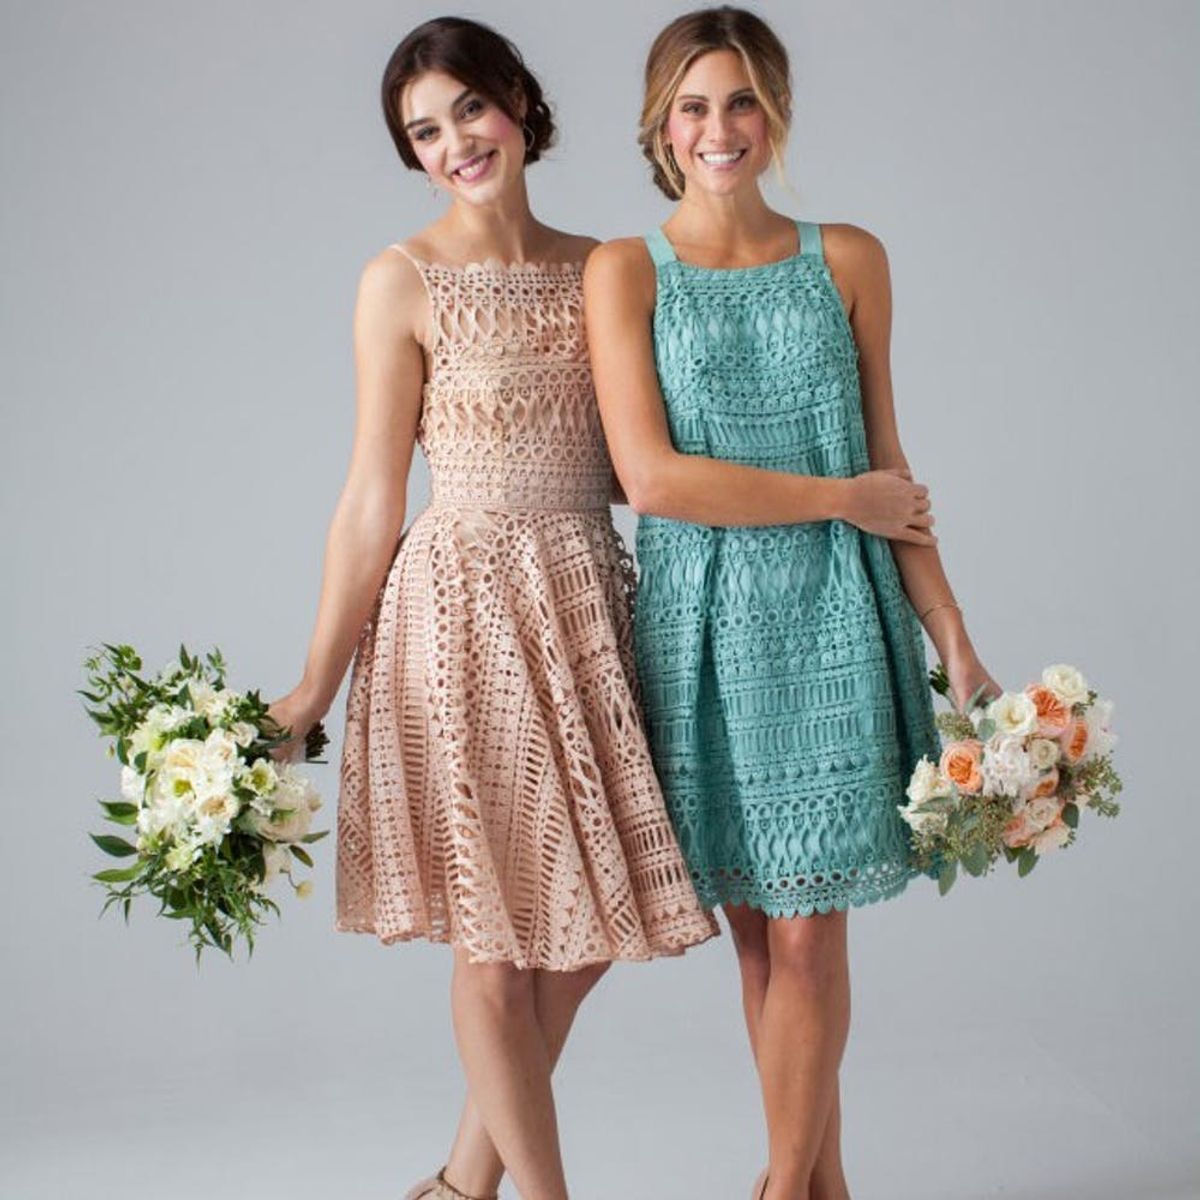 These Are the Bridesmaid Dresses You’ve Been Searching for (Literally)